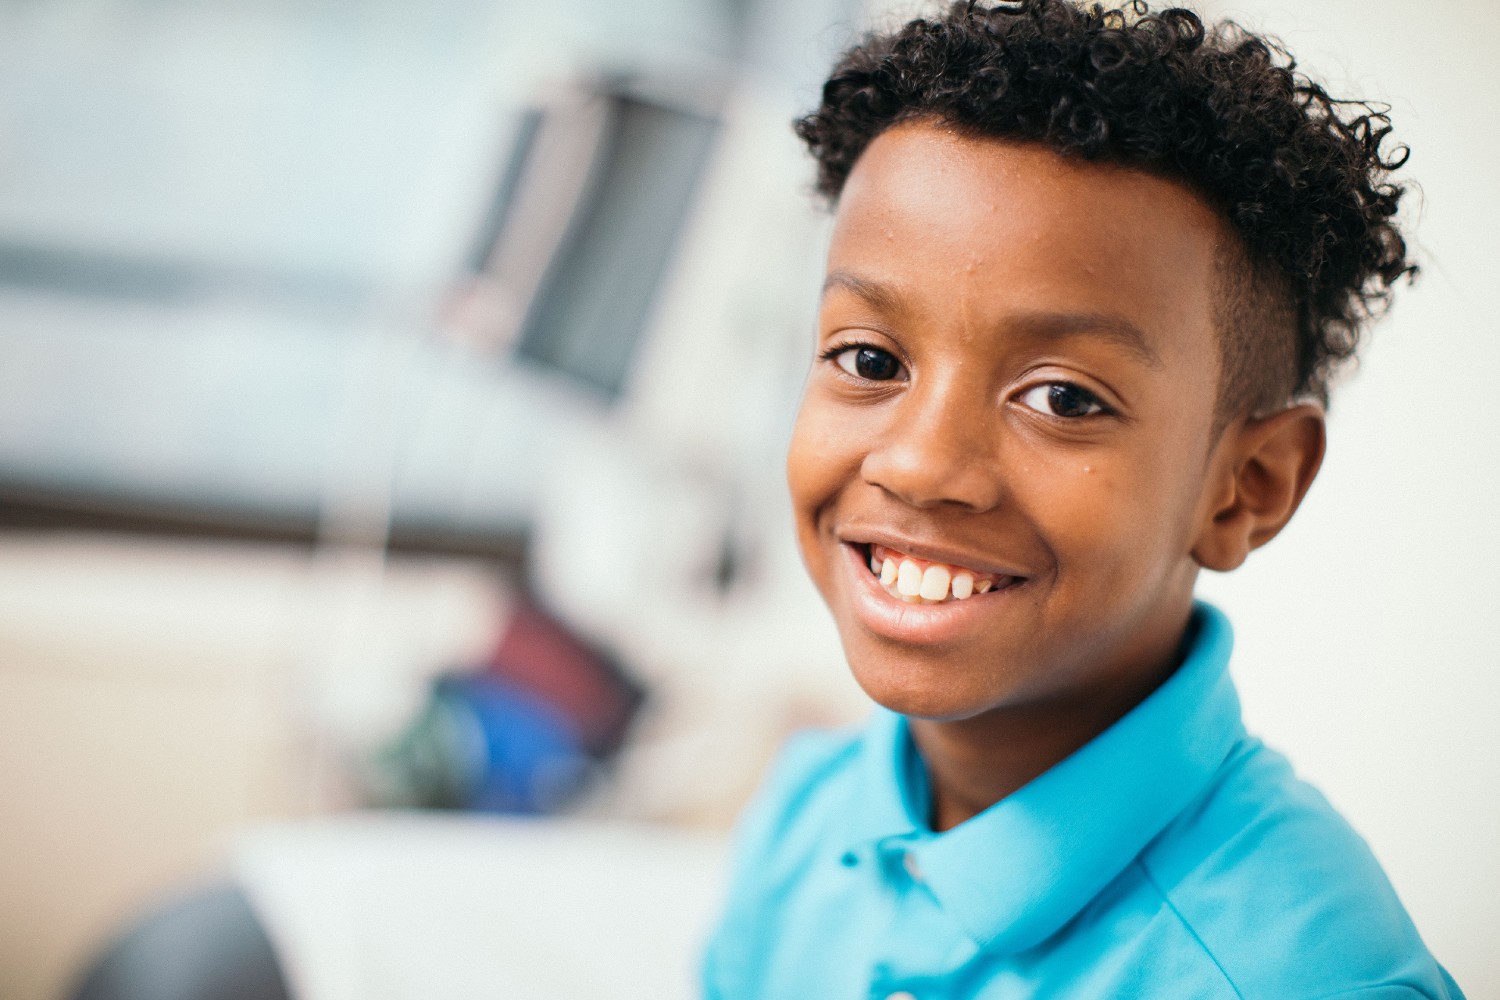 Young boy smiling in exam room